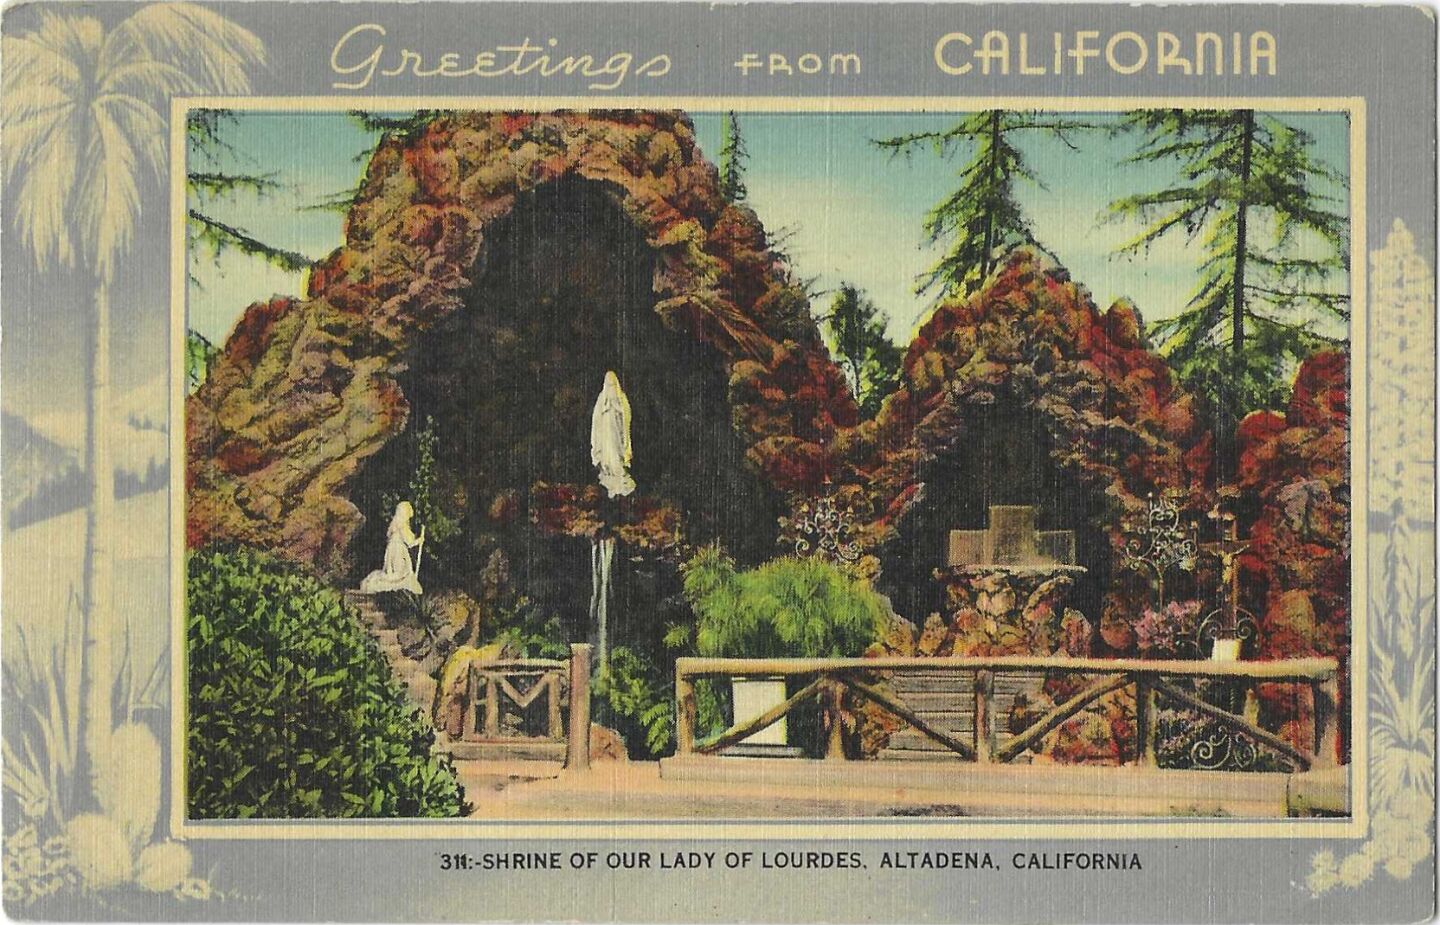 Built at the St. Elizabeth of Hungary church in Altadena, designed by architect Walter Neff, the grotto is modeled on the original in France. The church’s website calls it “the Lourdes of the West.”